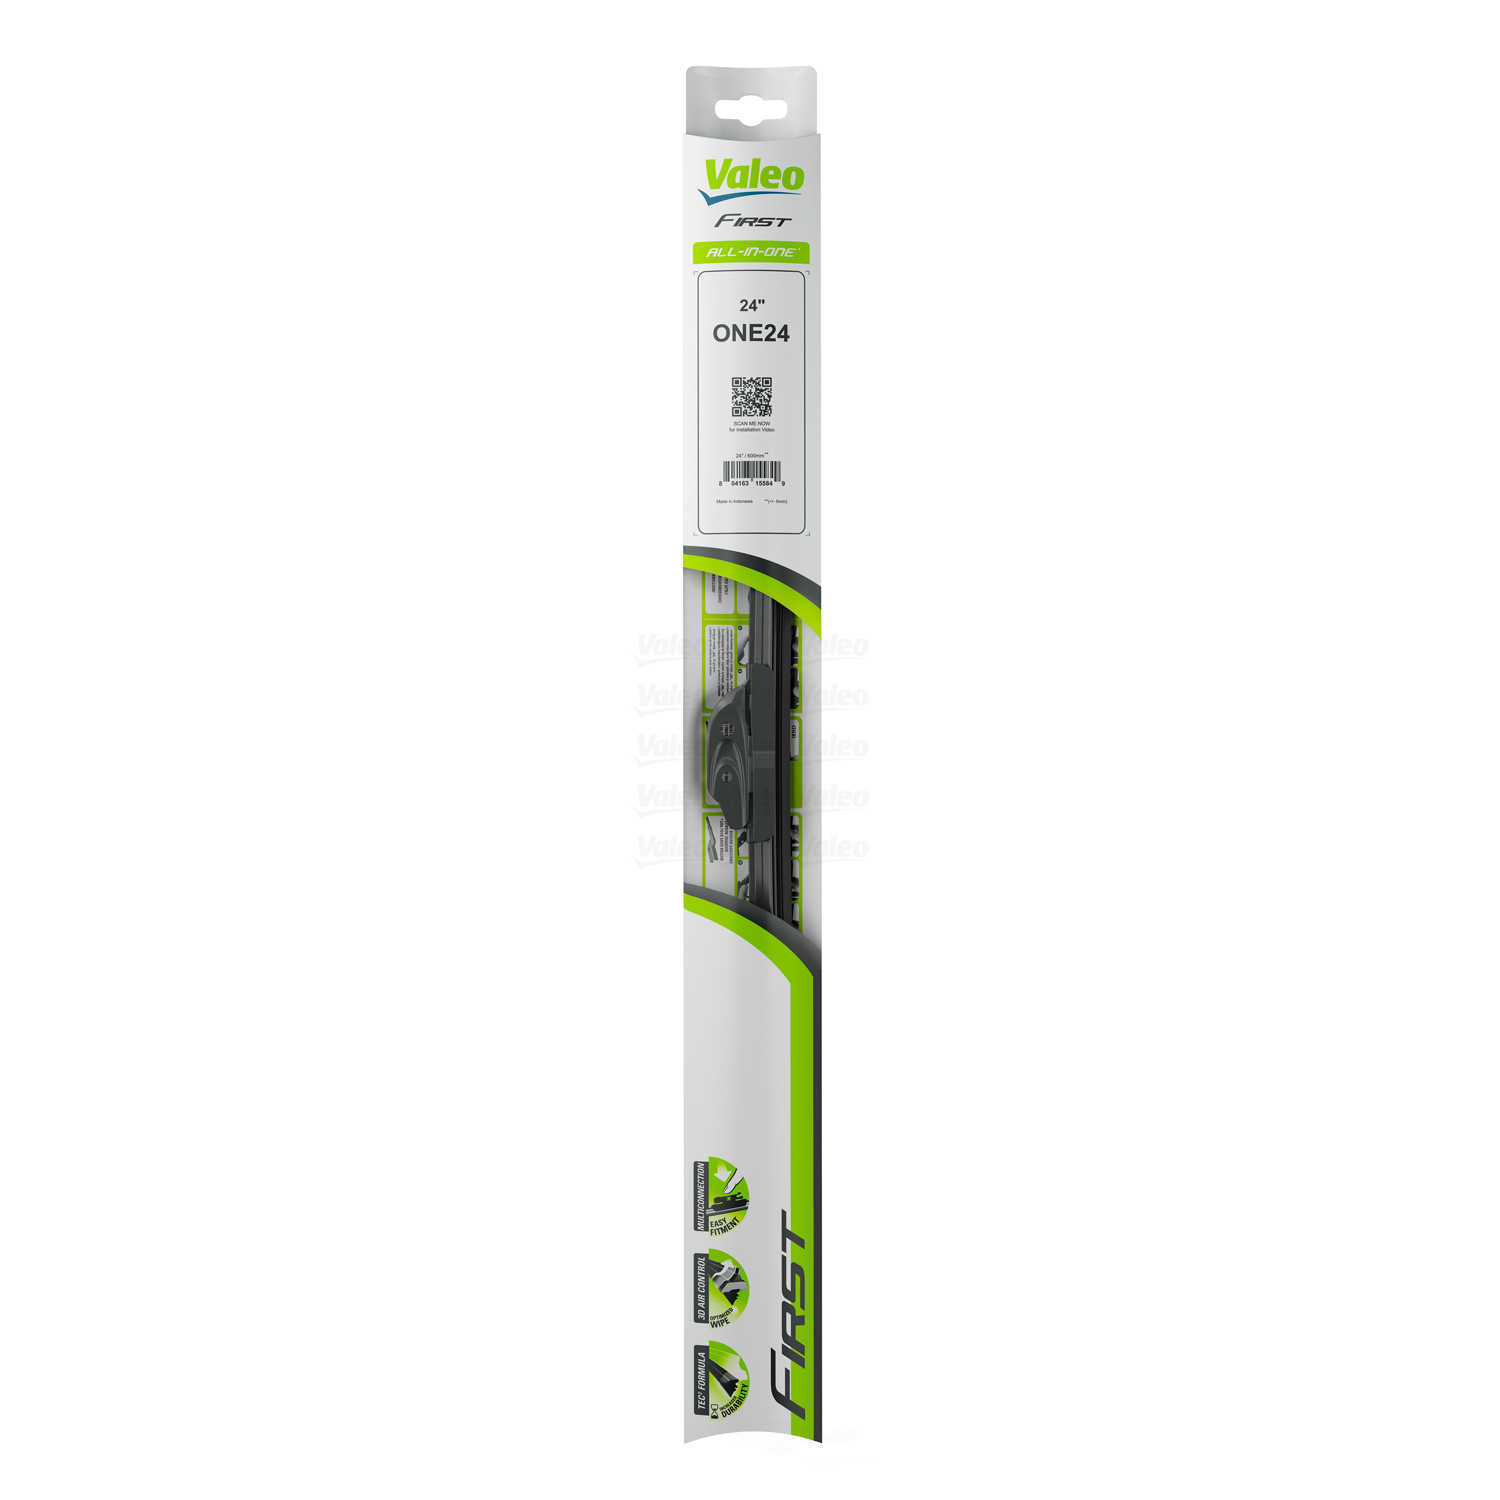 VALEO - First All-in-one Windshield Wiper Blade (Front Left) - VEO ONE24